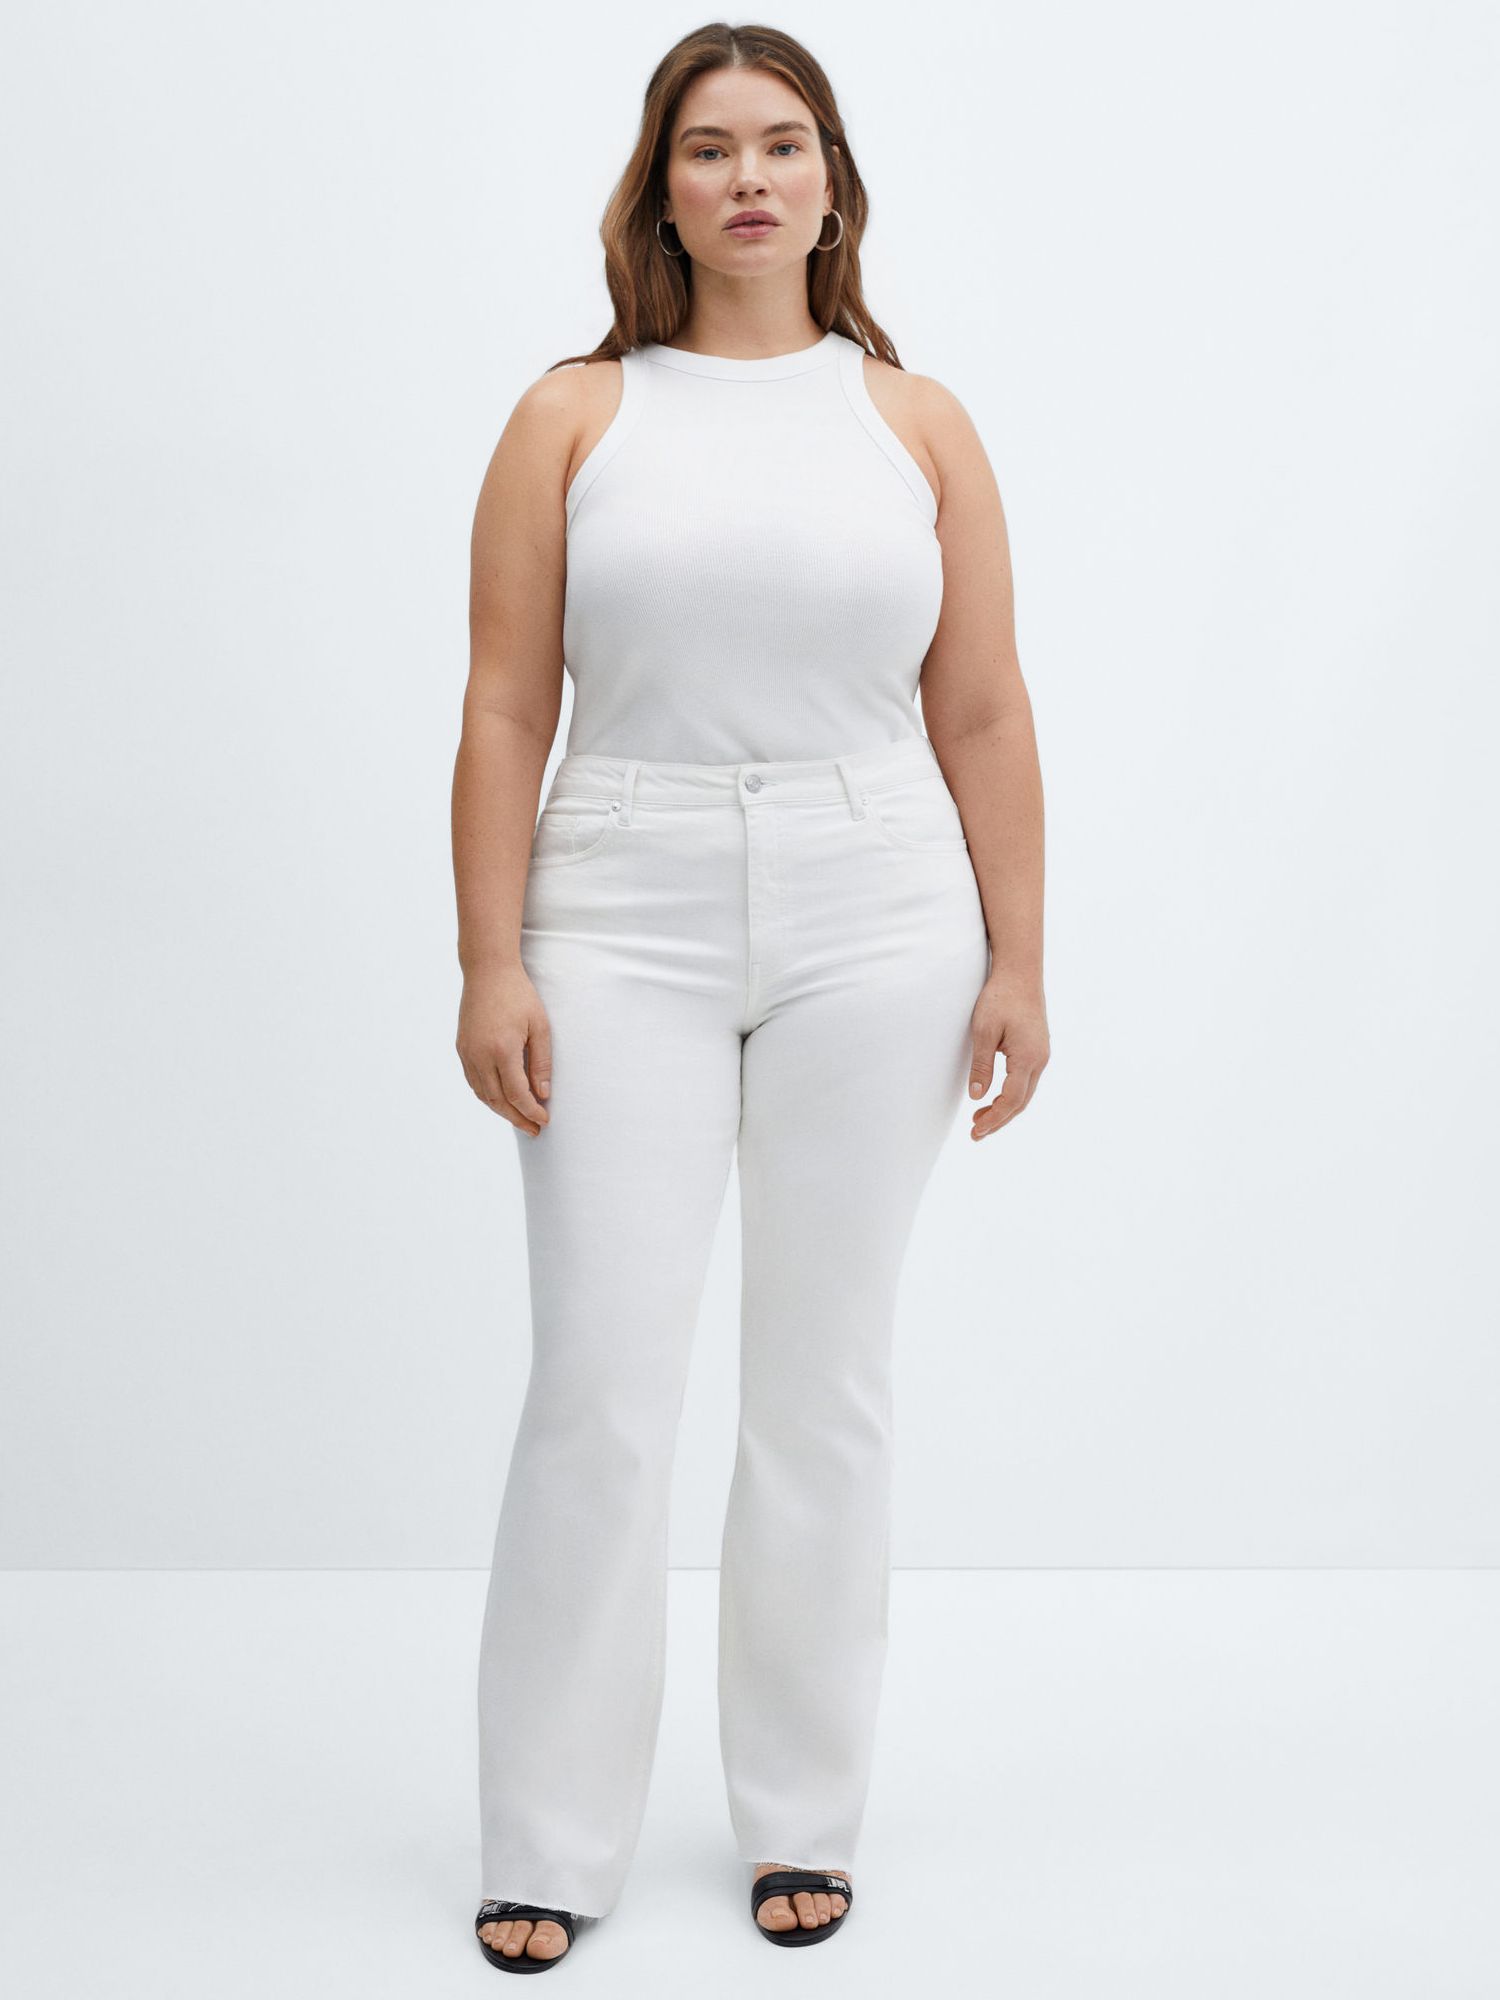 Buy Mango Fiona Flared Jeans, White Online at johnlewis.com